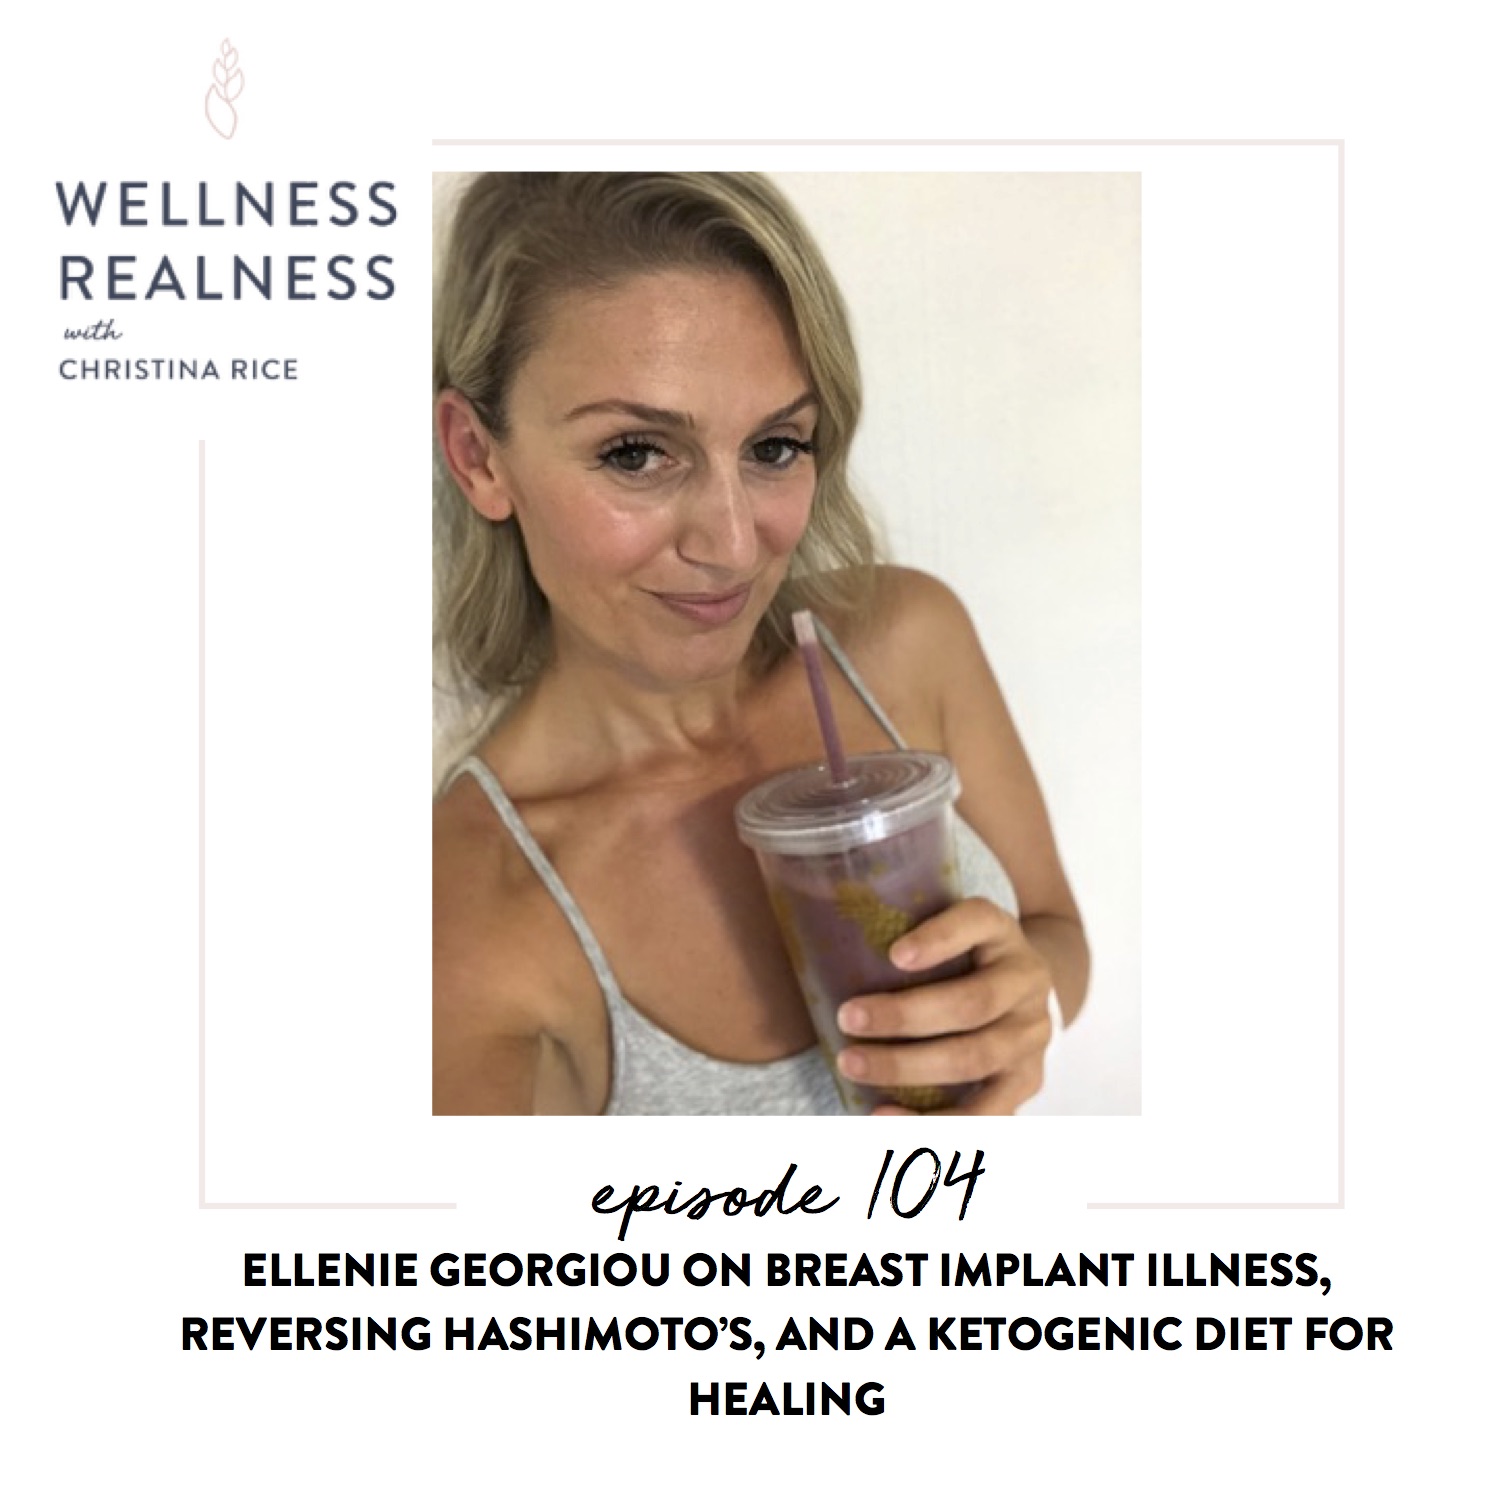 104: Ellenie Georgiou on Breast Implant Illness, Reversing Hashimoto’s, and a Ketogenic Diet for Healing